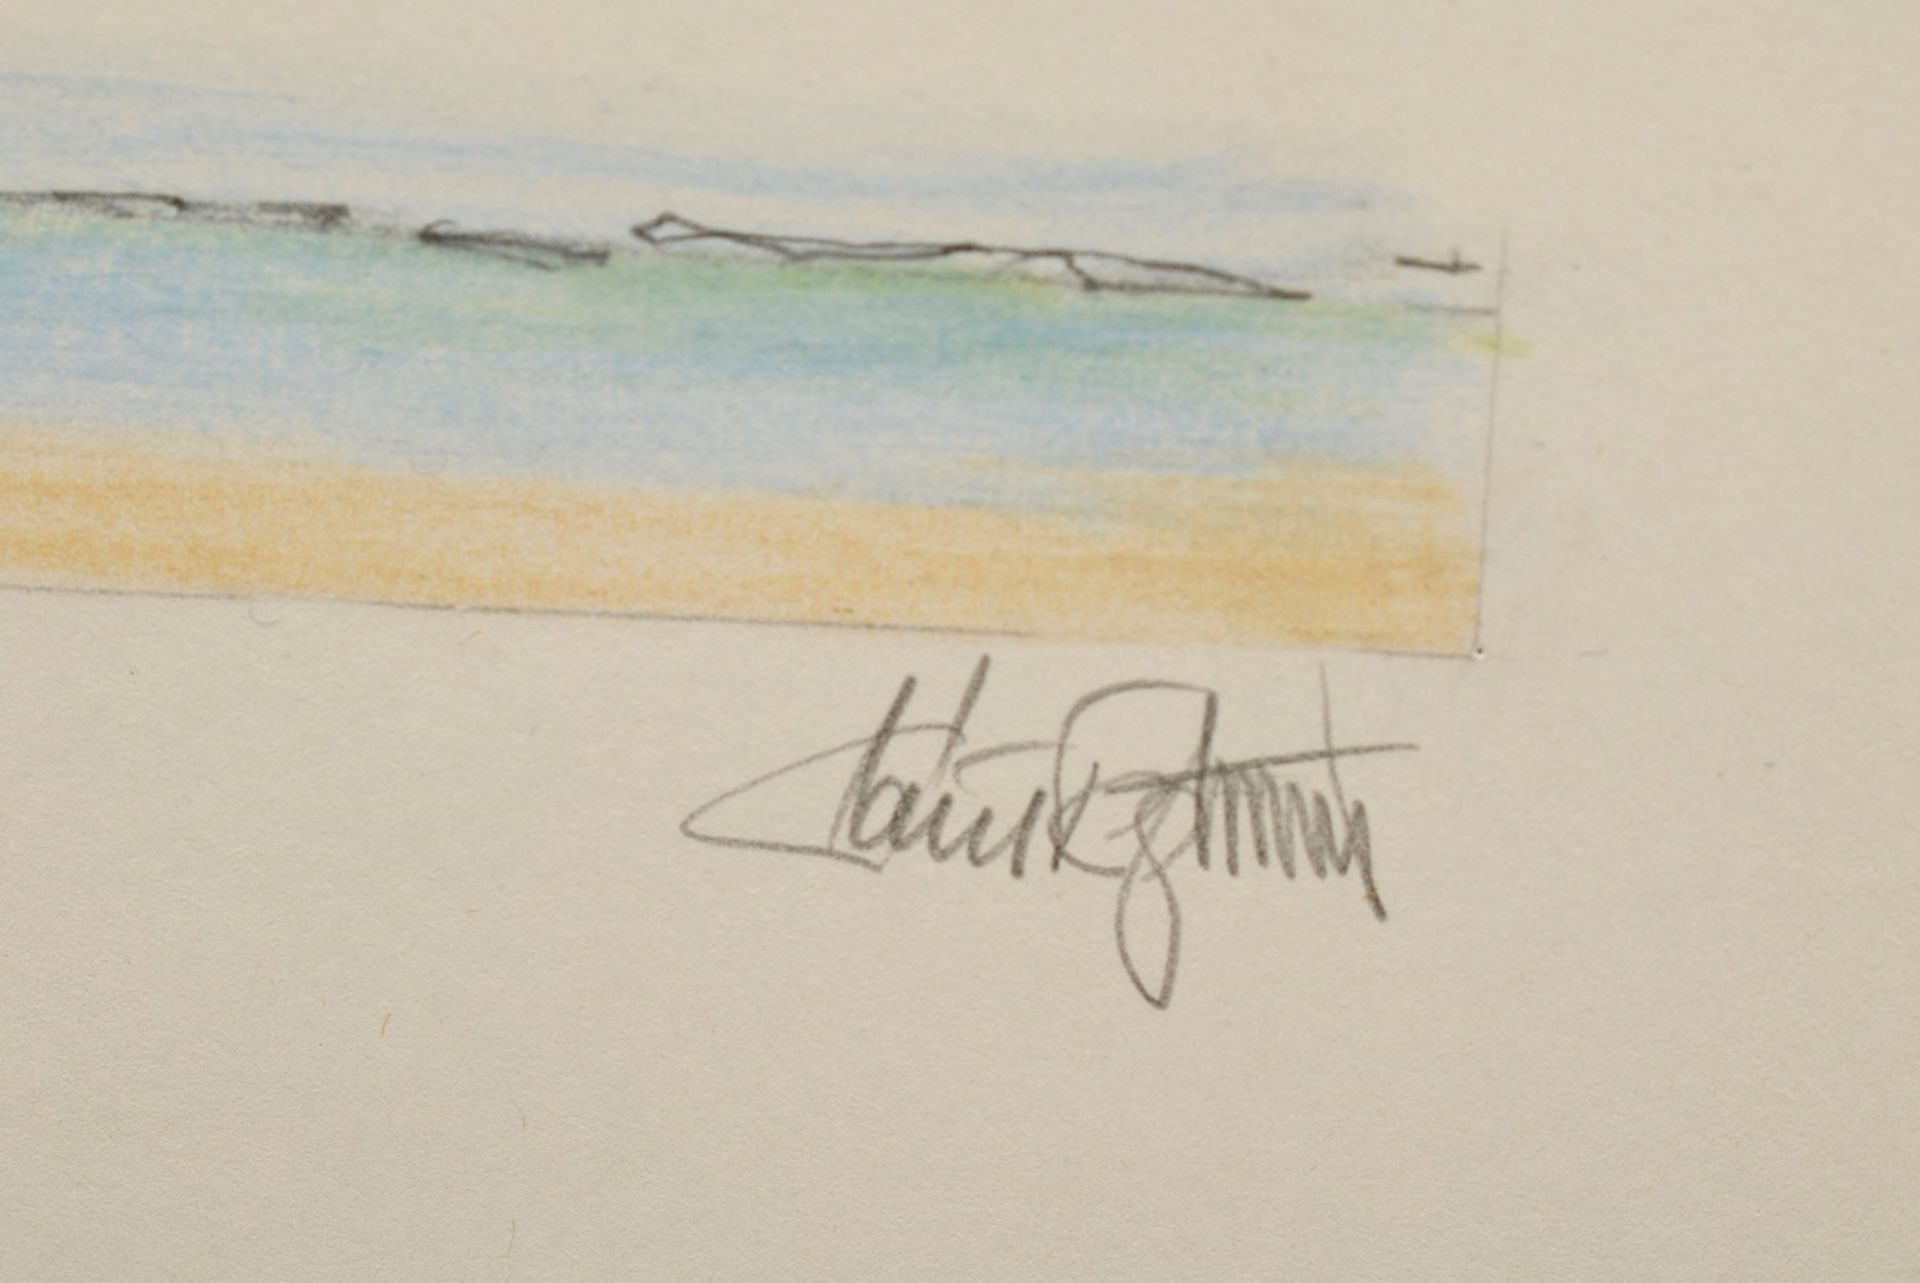 3 Tegtmeier, Claus (*1946) "Sand stripes", High and Dry" and "Night flood", pencil/coloured pencil, - Image 3 of 11